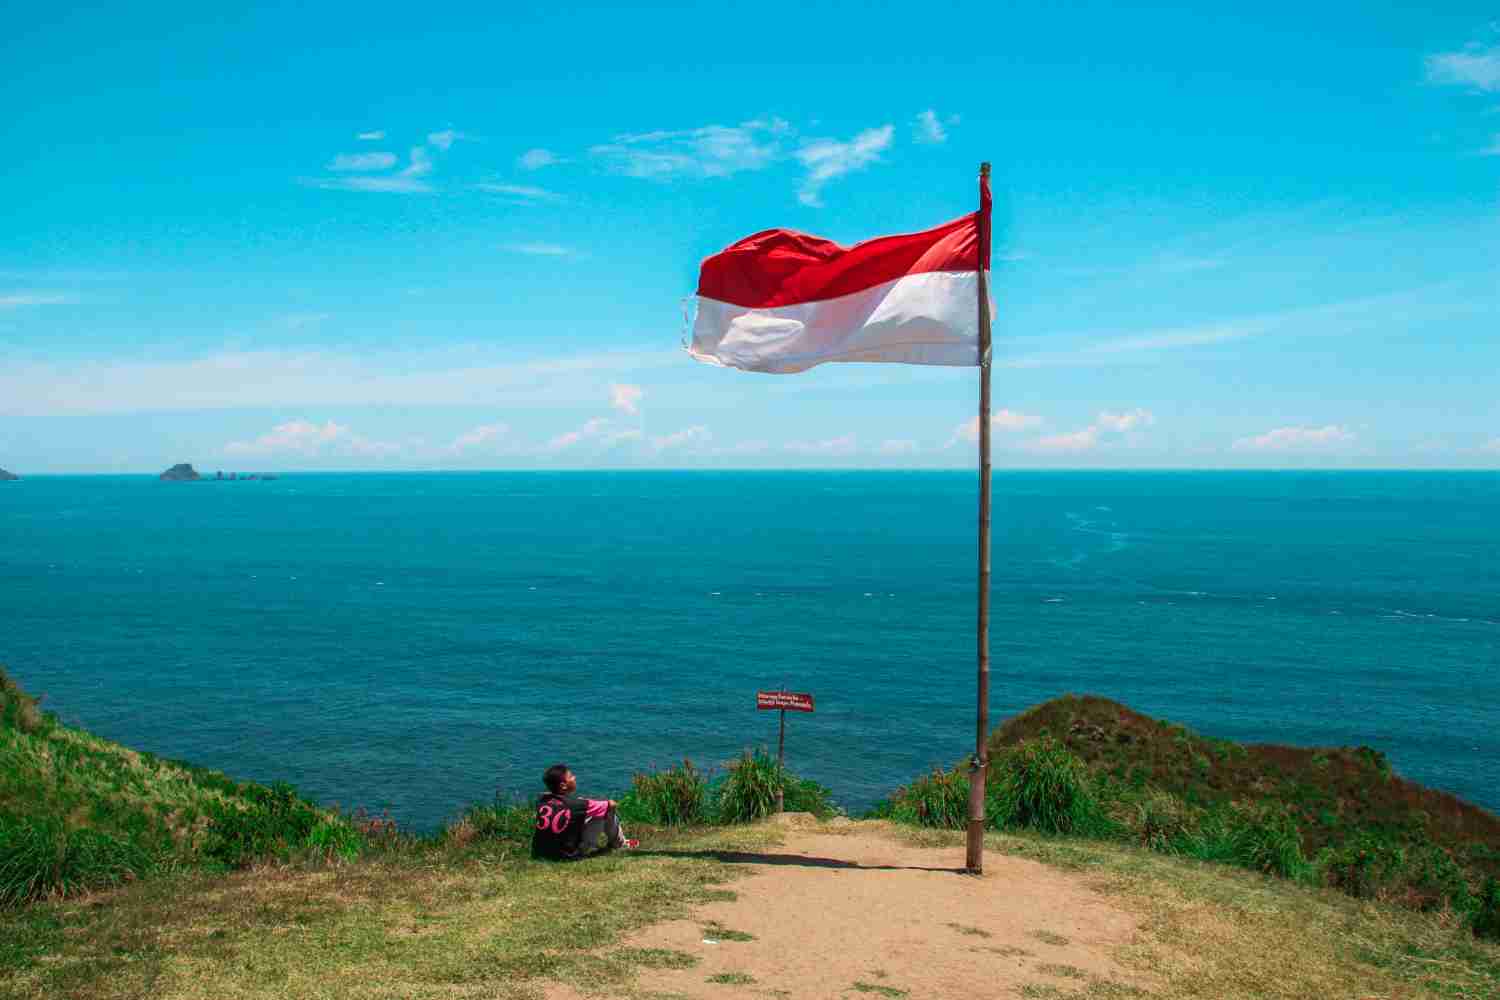  Troubled Waters: Indonesia & the South China Sea